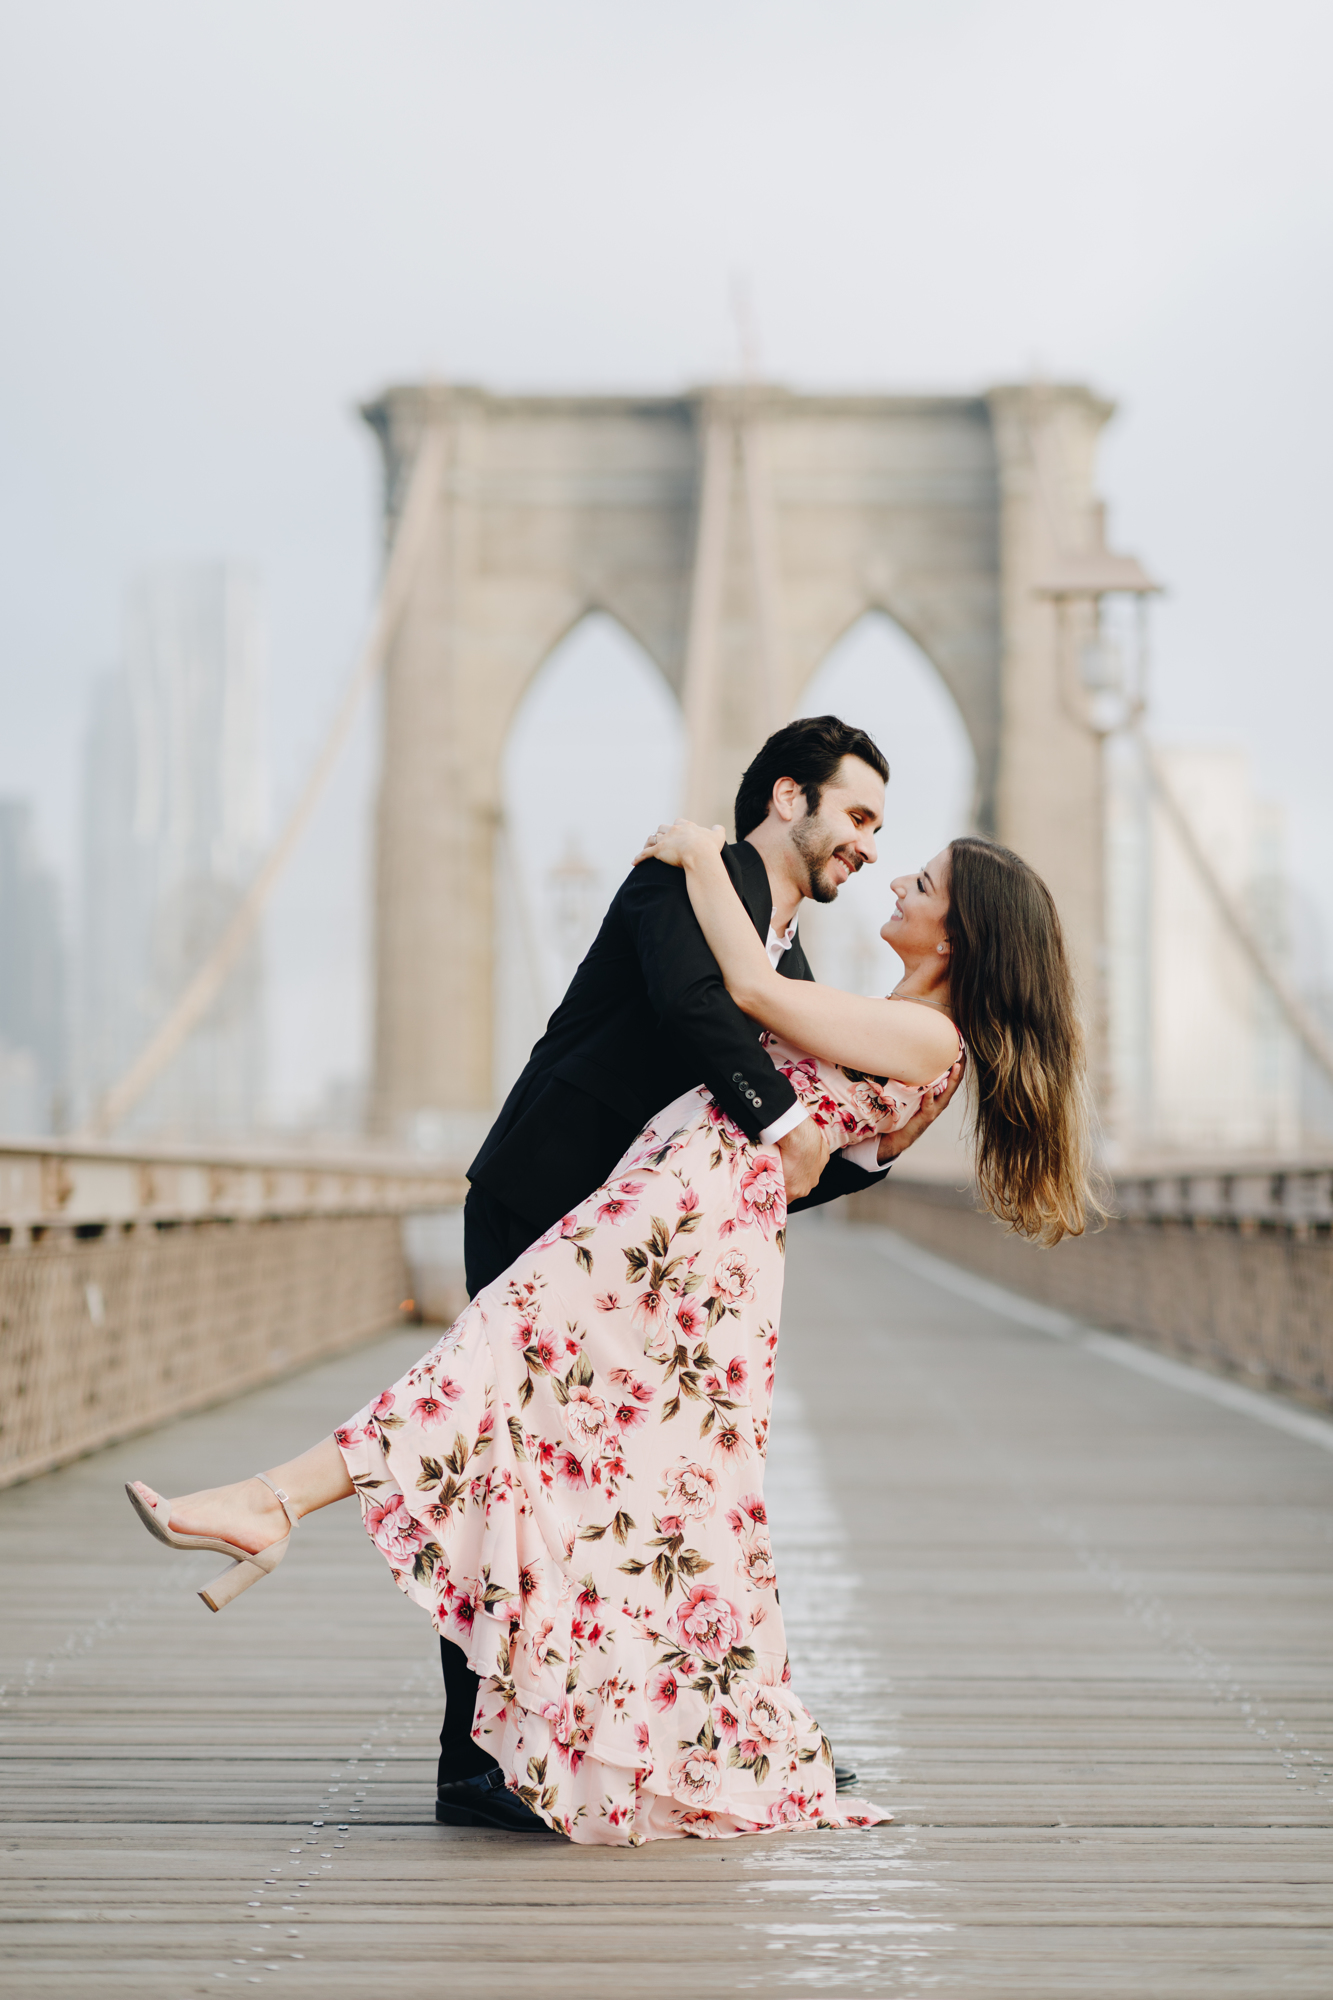 Stylish NYC Engagement Photography with Spring Blossoms